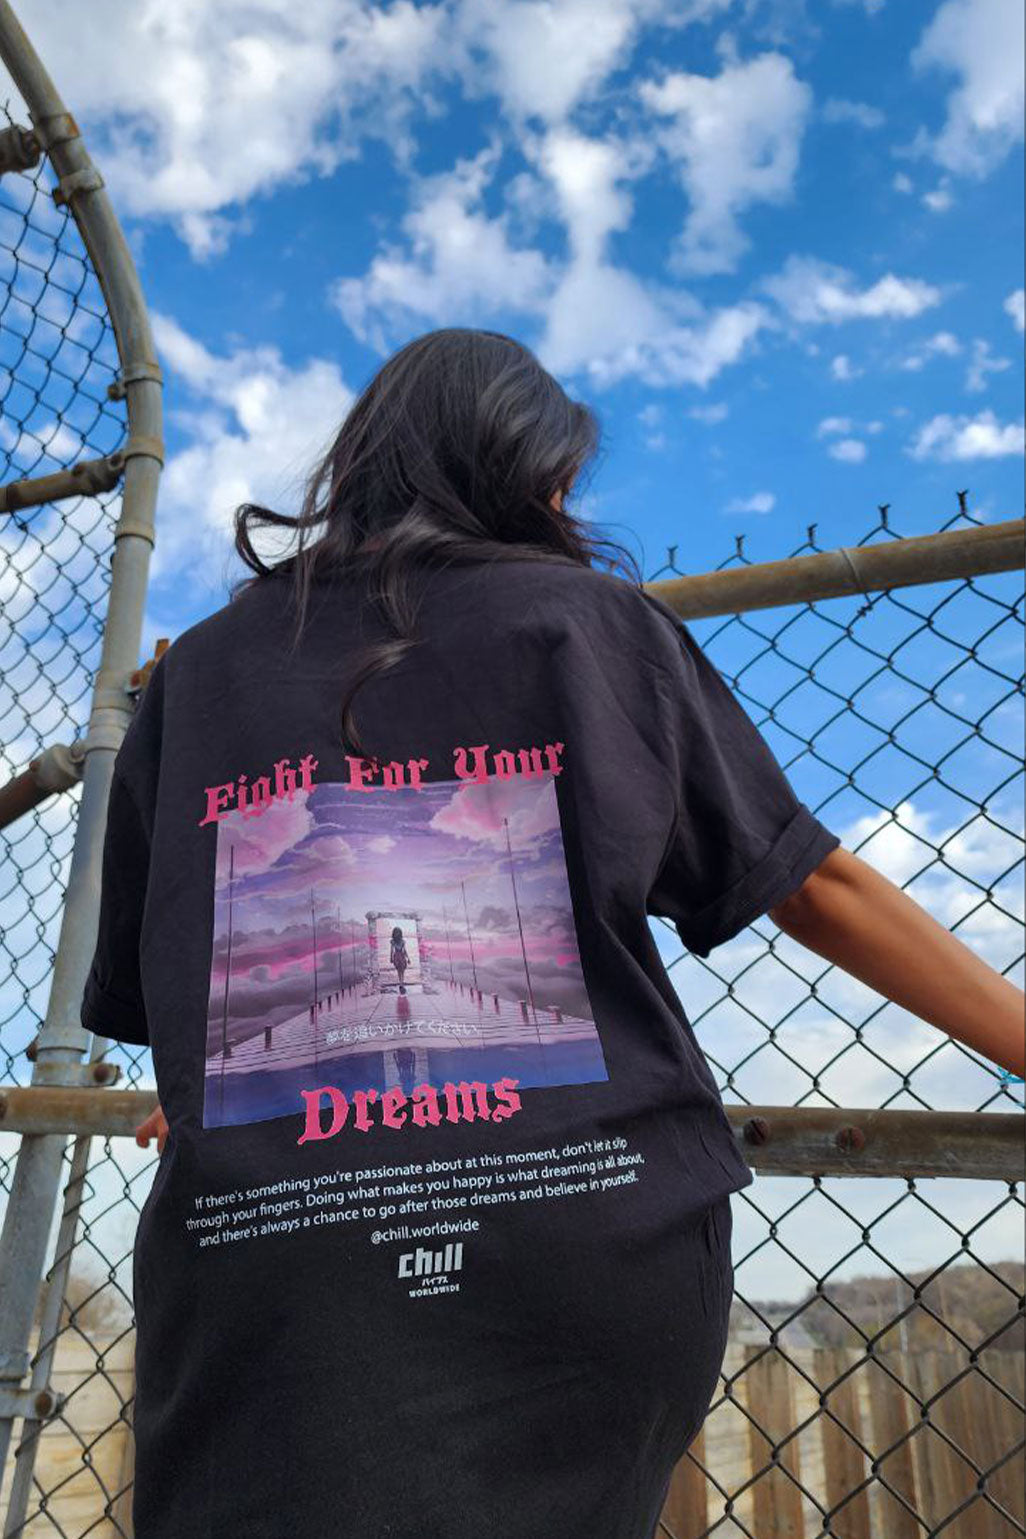 Fight For Your Dreams Tee